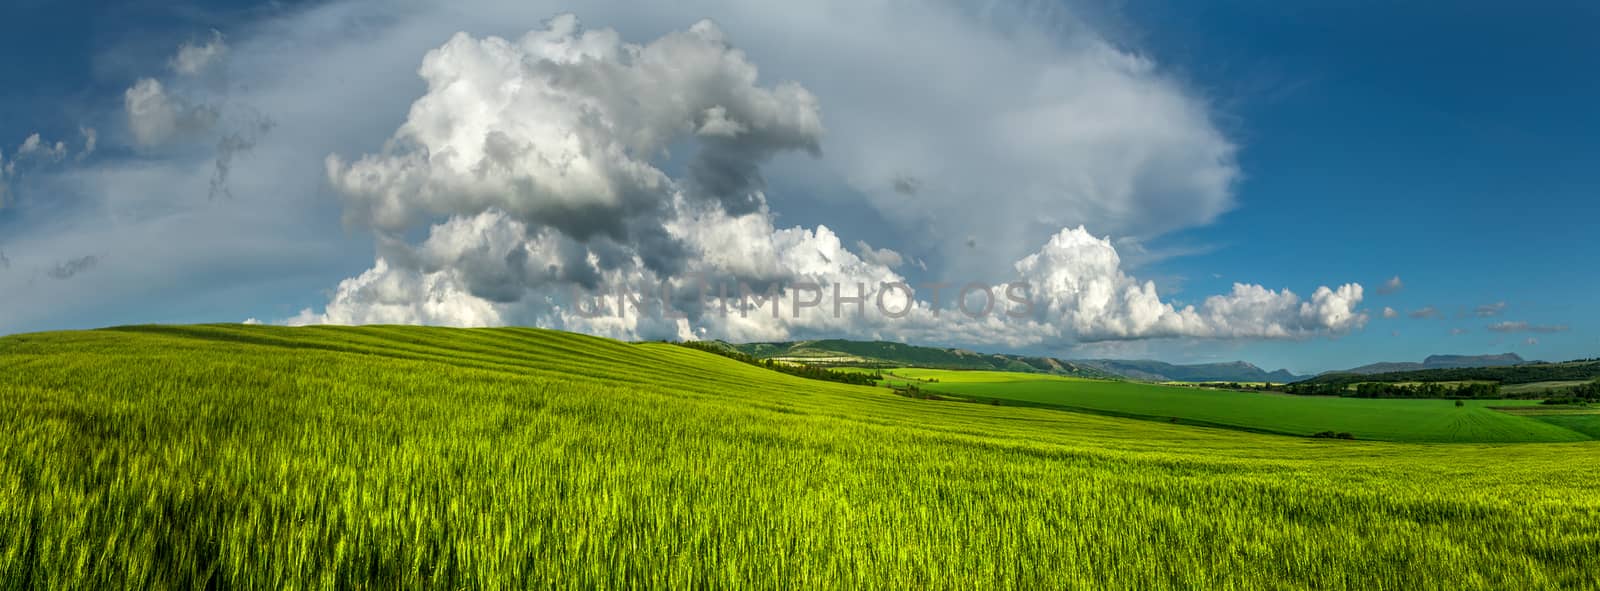 Panorama. Wheat field on a background of cloudy sky.